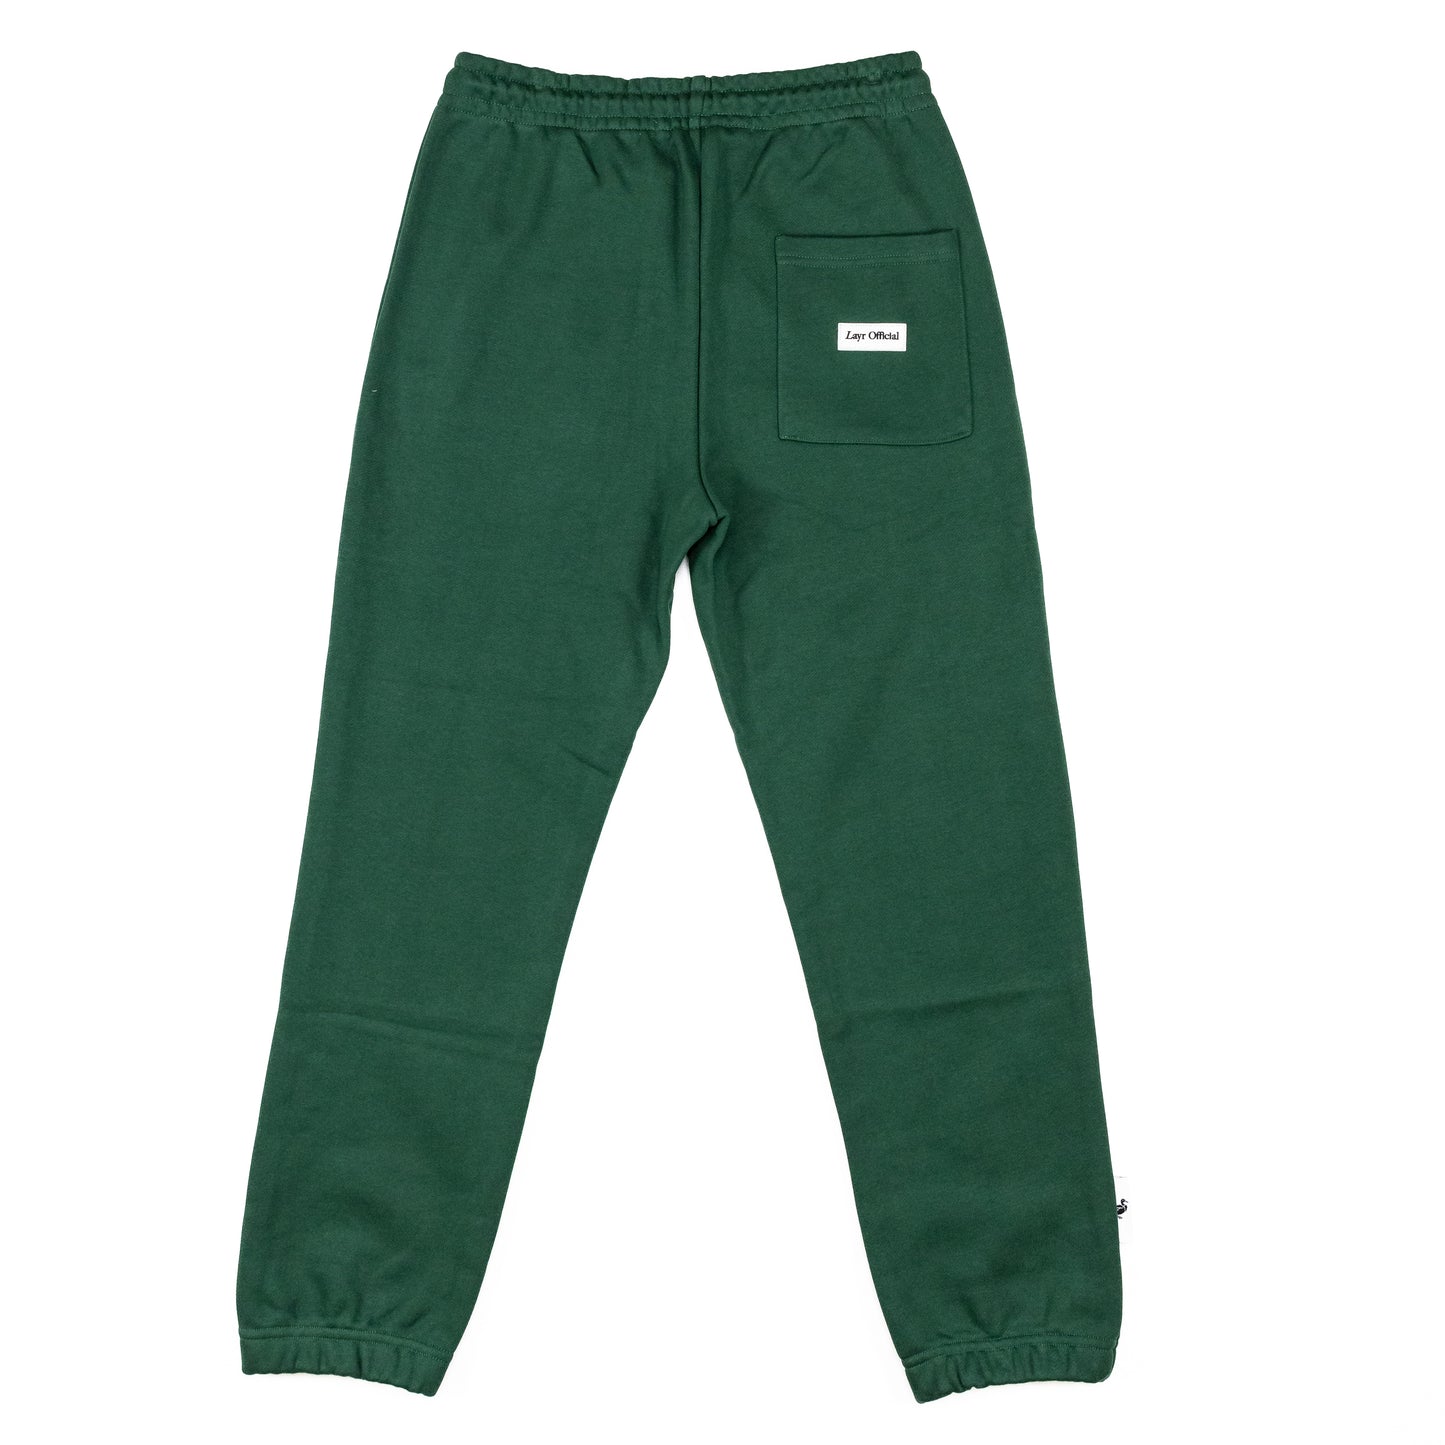 N2M Jogger, Green/Navy-Orange-Yellow - Layr Official